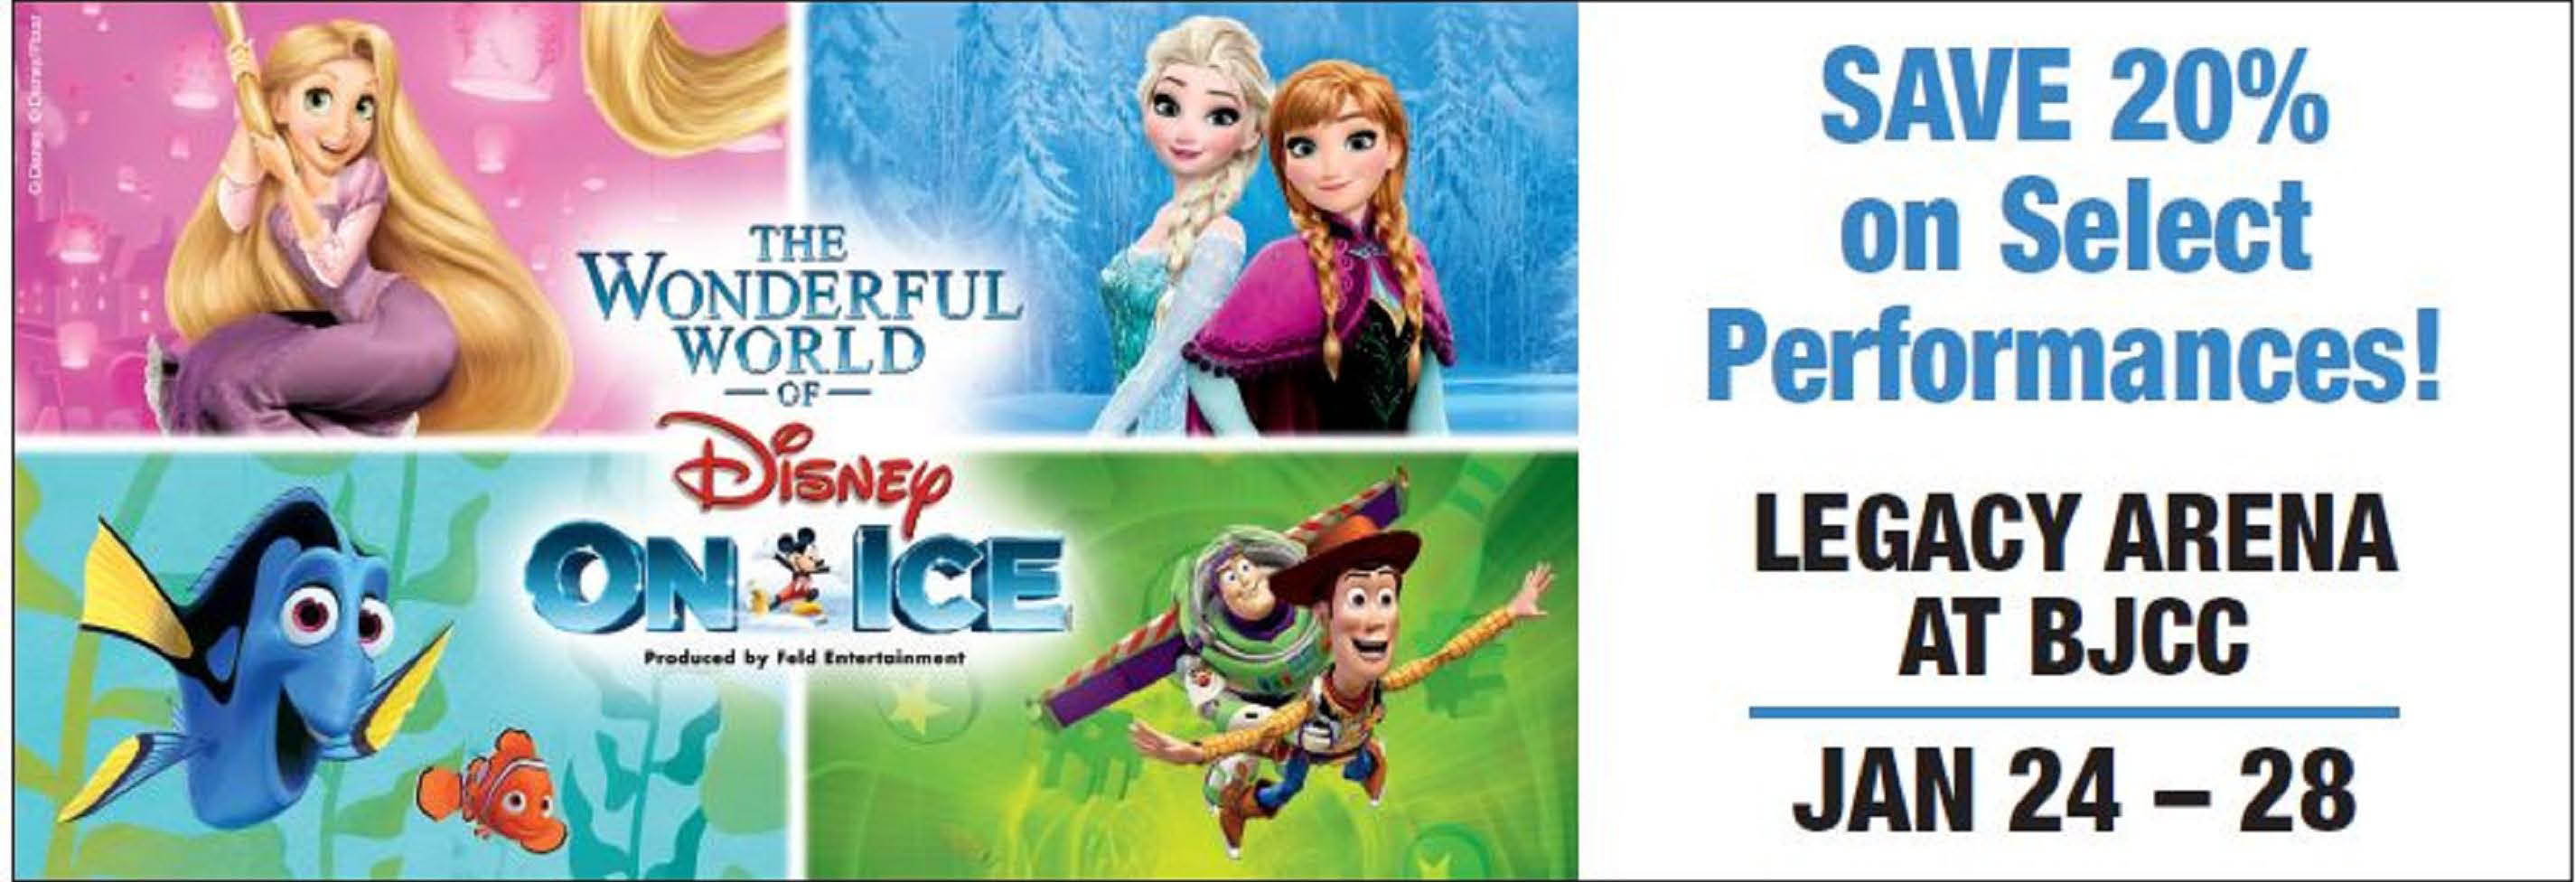 Disney On Ice Tickets-Discount Coupon Code-Birmingham Shows